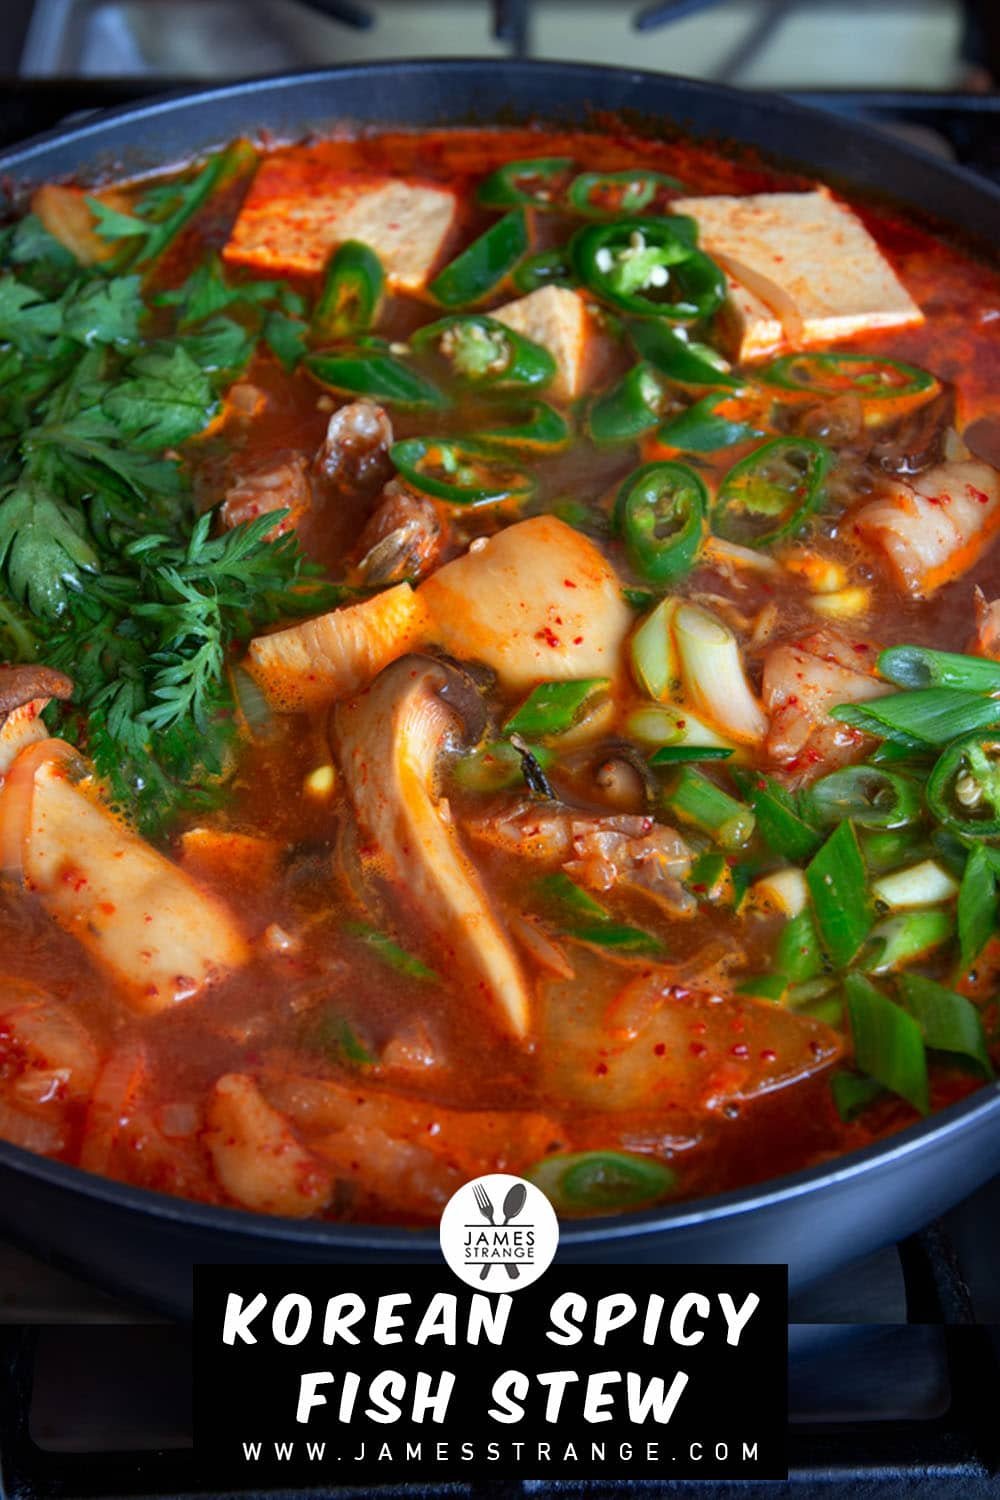 Spicy fish stew cooking on a stove. This is a pin for Pinterest